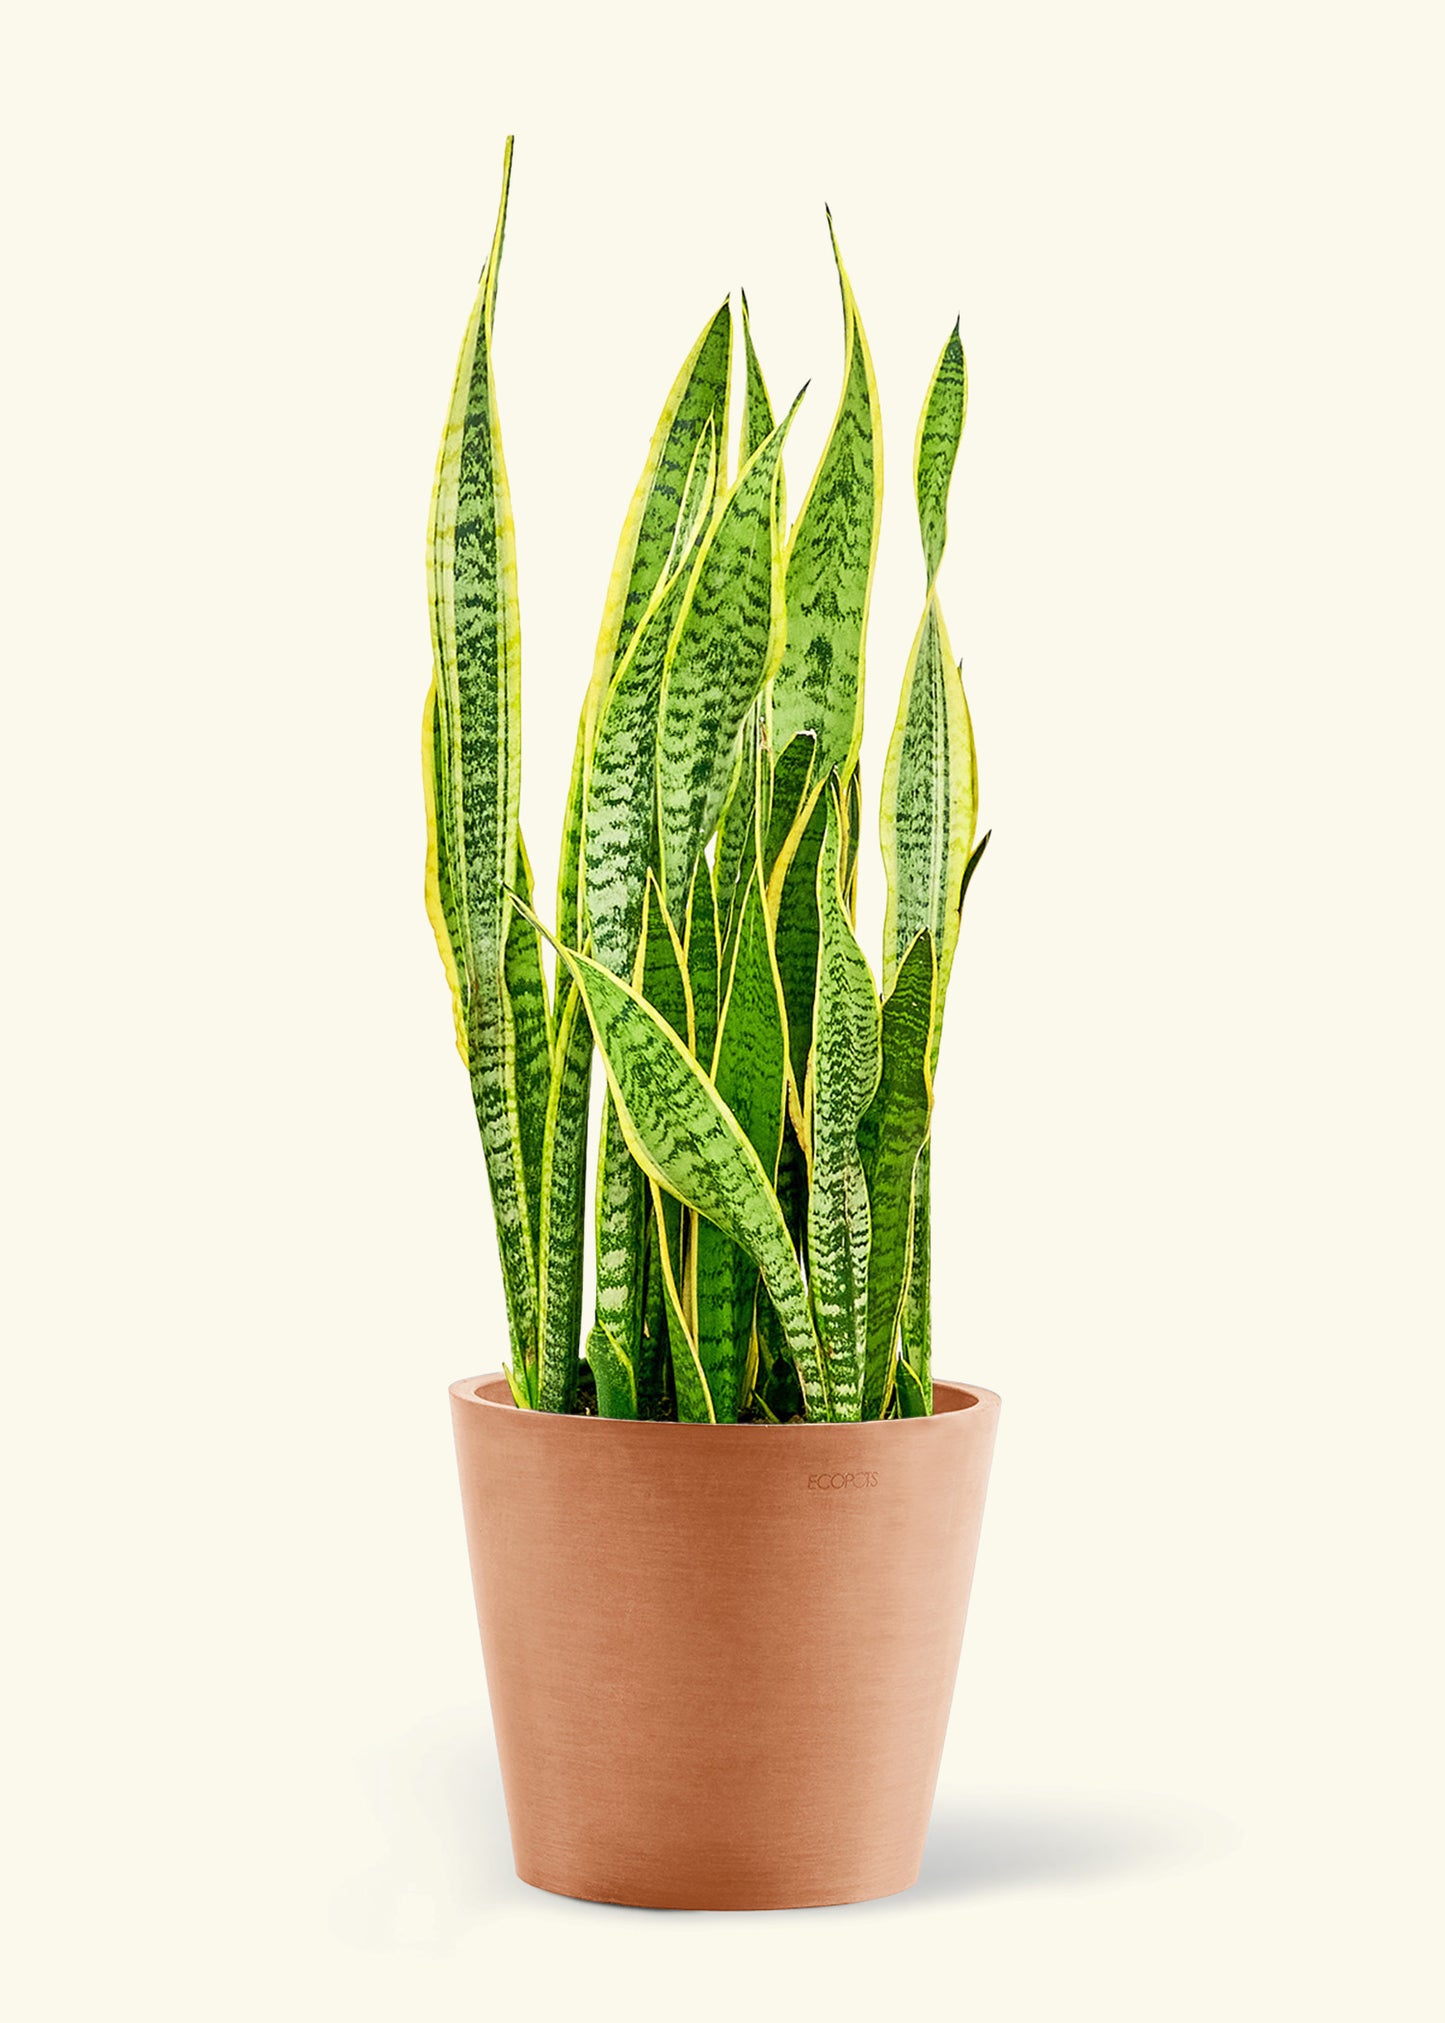 Large Snake Plant 'Laurentii' Plant in a terracotta pot.